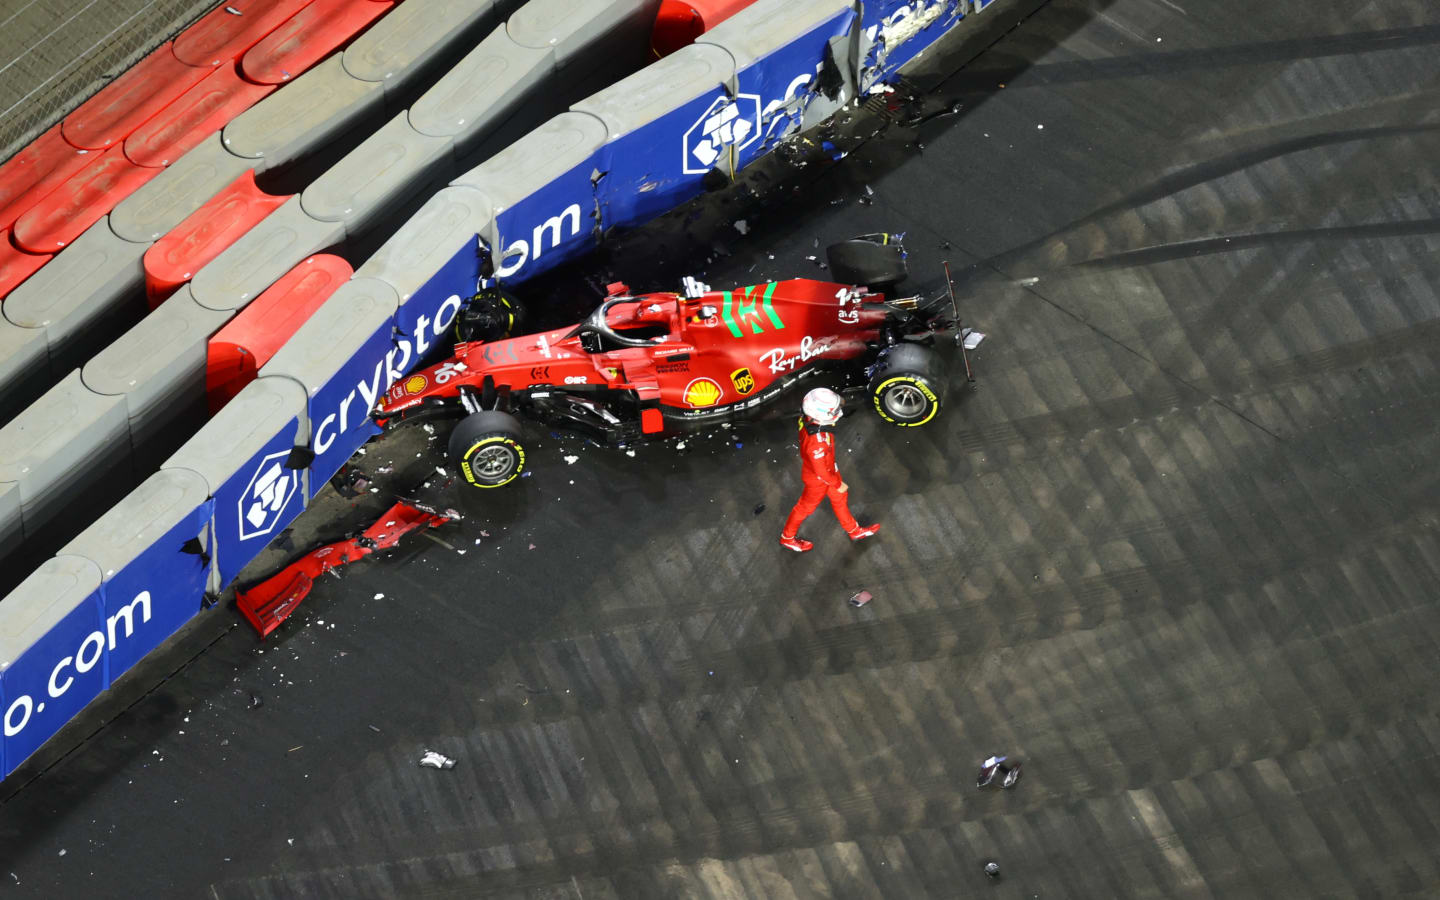 JEDDAH, SAUDI ARABIA - DECEMBER 03: Charles Leclerc of Monaco and Ferrari looks at his car after crashing during practice ahead of the F1 Grand Prix of Saudi Arabia at Jeddah Corniche Circuit on December 03, 2021 in Jeddah, Saudi Arabia. (Photo by Bryn Lennon - Formula 1/Formula 1 via Getty Images)